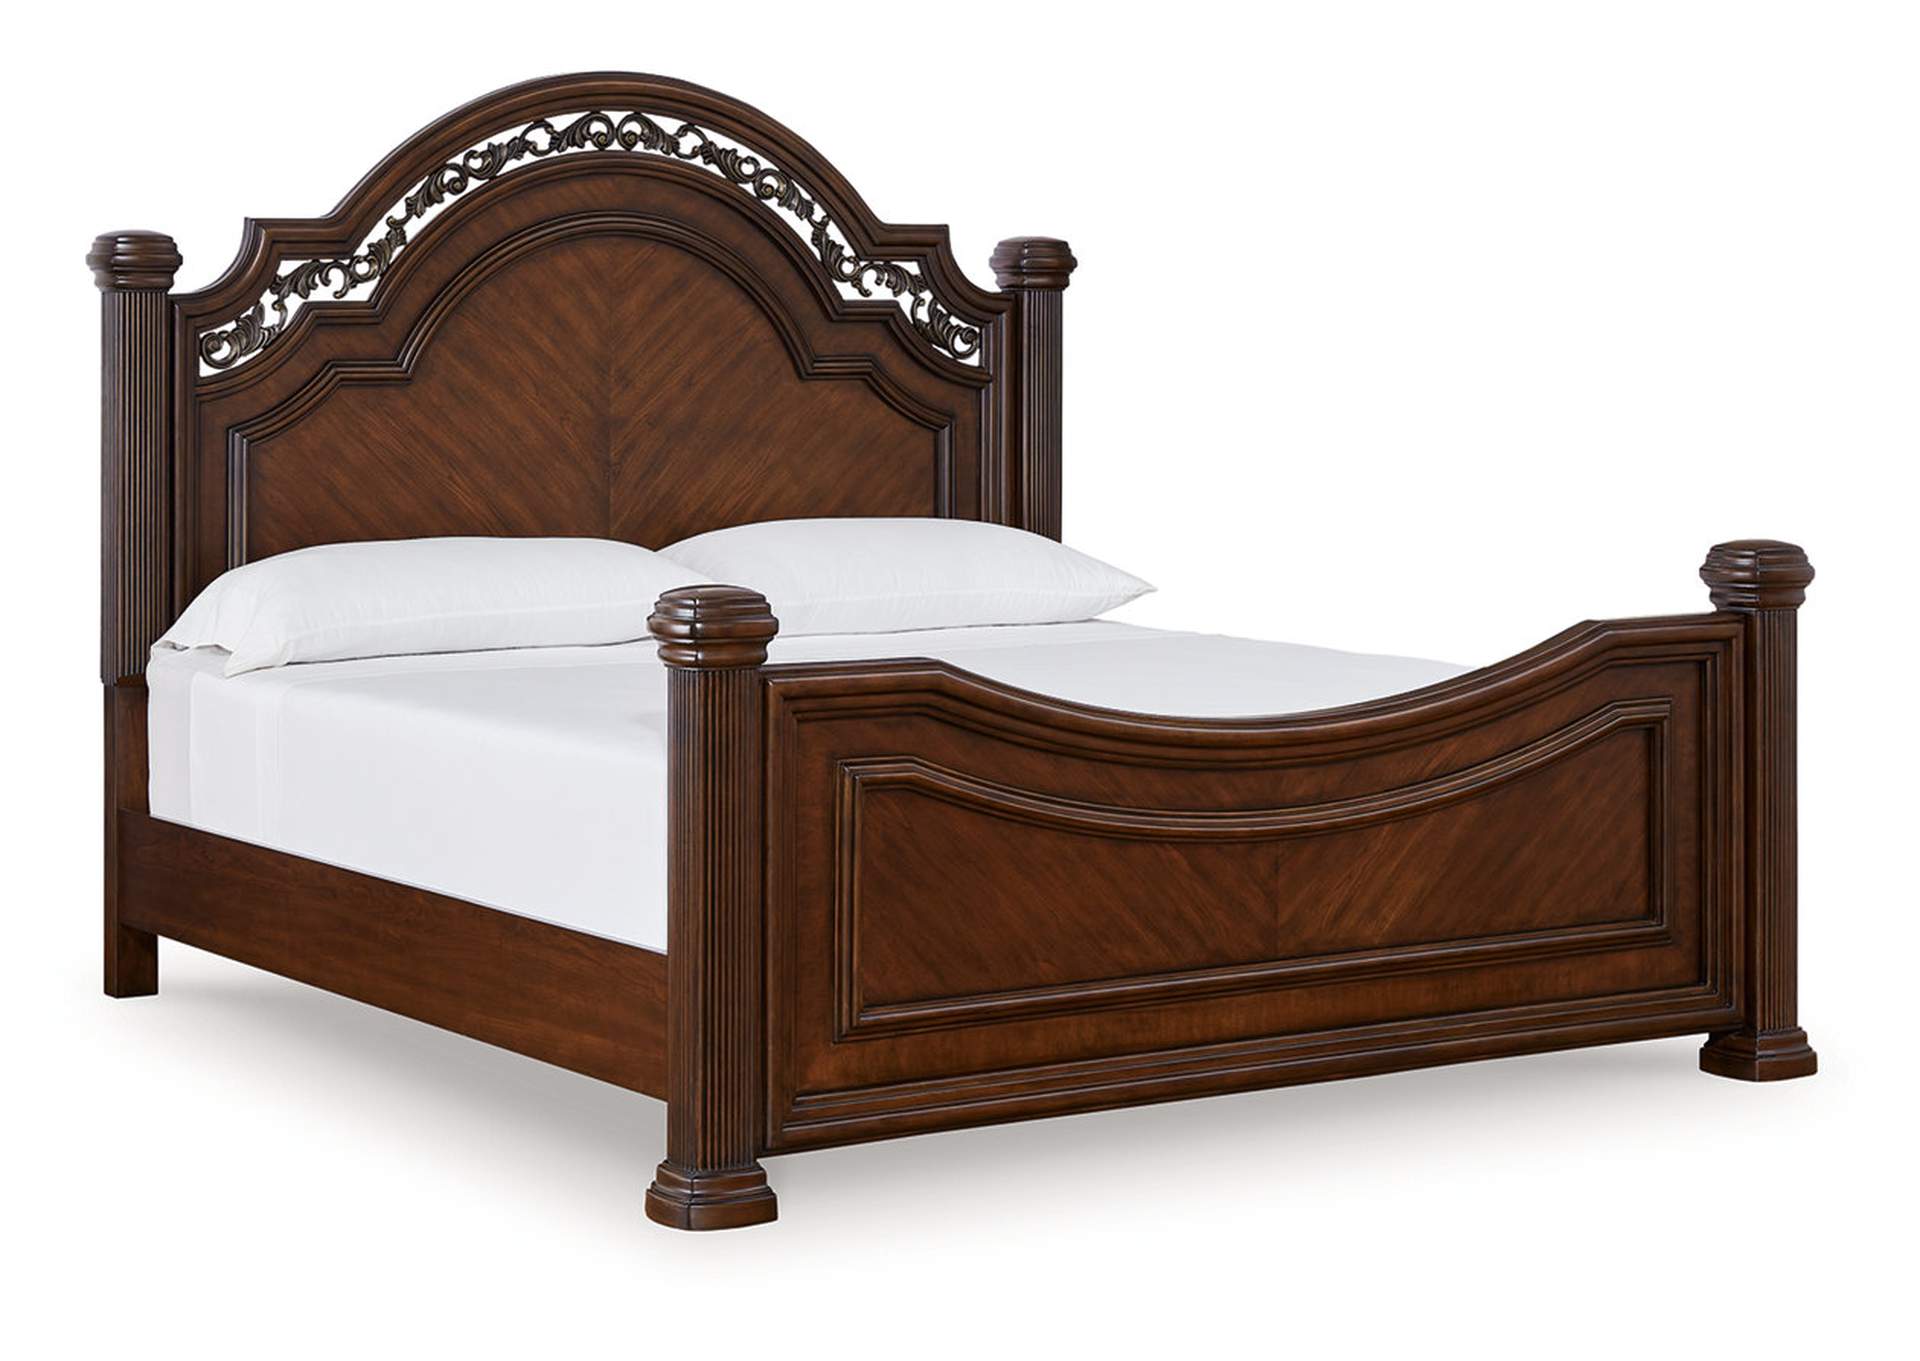 Lavinton Queen Poster Bed,Signature Design By Ashley